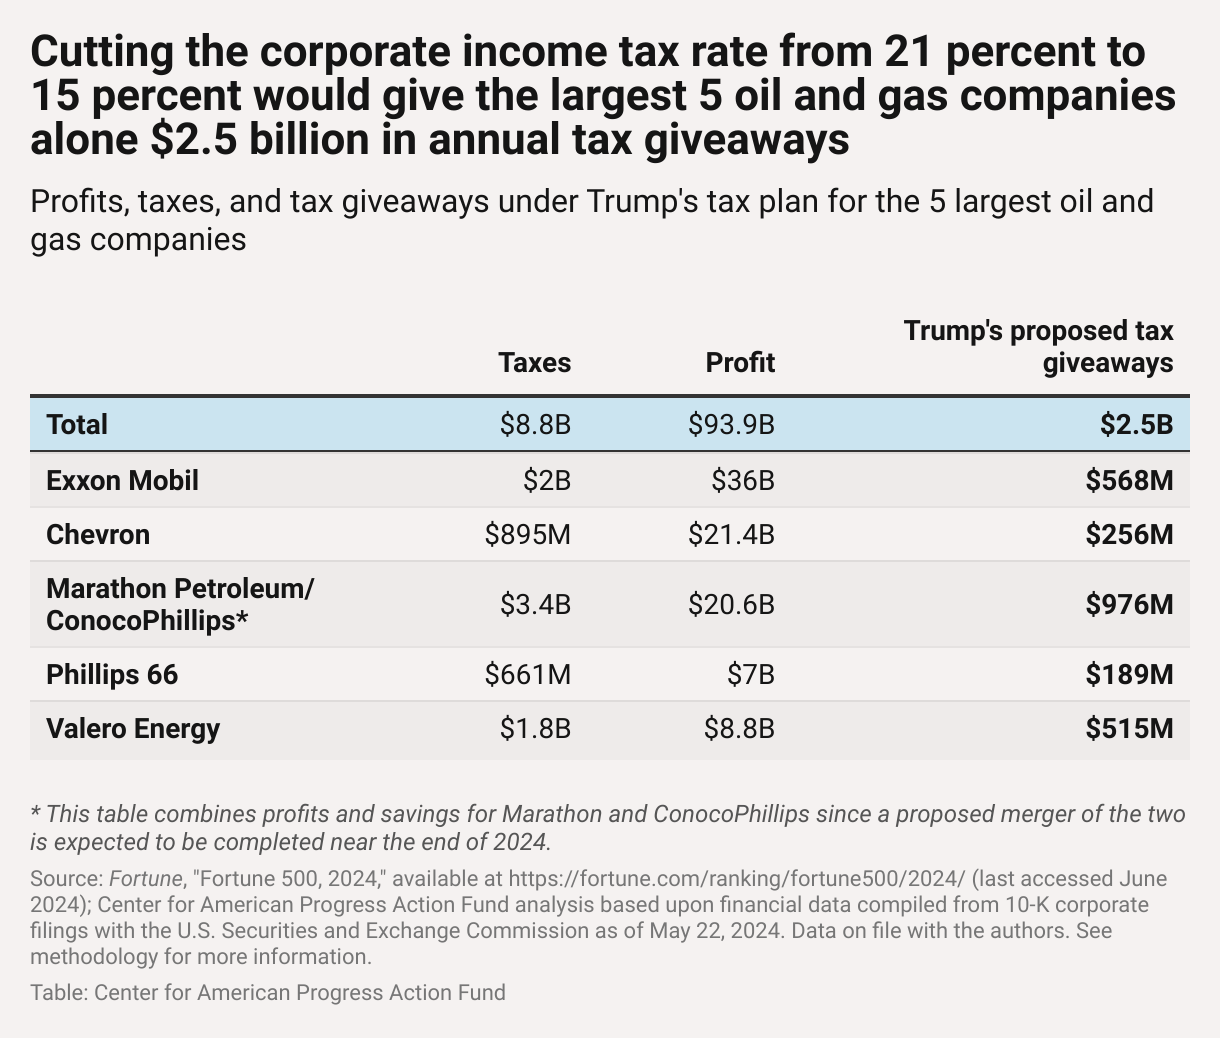 Table showing the five largest oil and gas companies' latest reported profits and federal income taxes paid along with the tax savings each company would receive from Trump's proposed corporate income tax cut, showing that Exxon Mobil, Chevron, Marathon, Phillips 66, and Valero Energy would receive a combined annual $2.5 billion tax break under Trump's plan. 